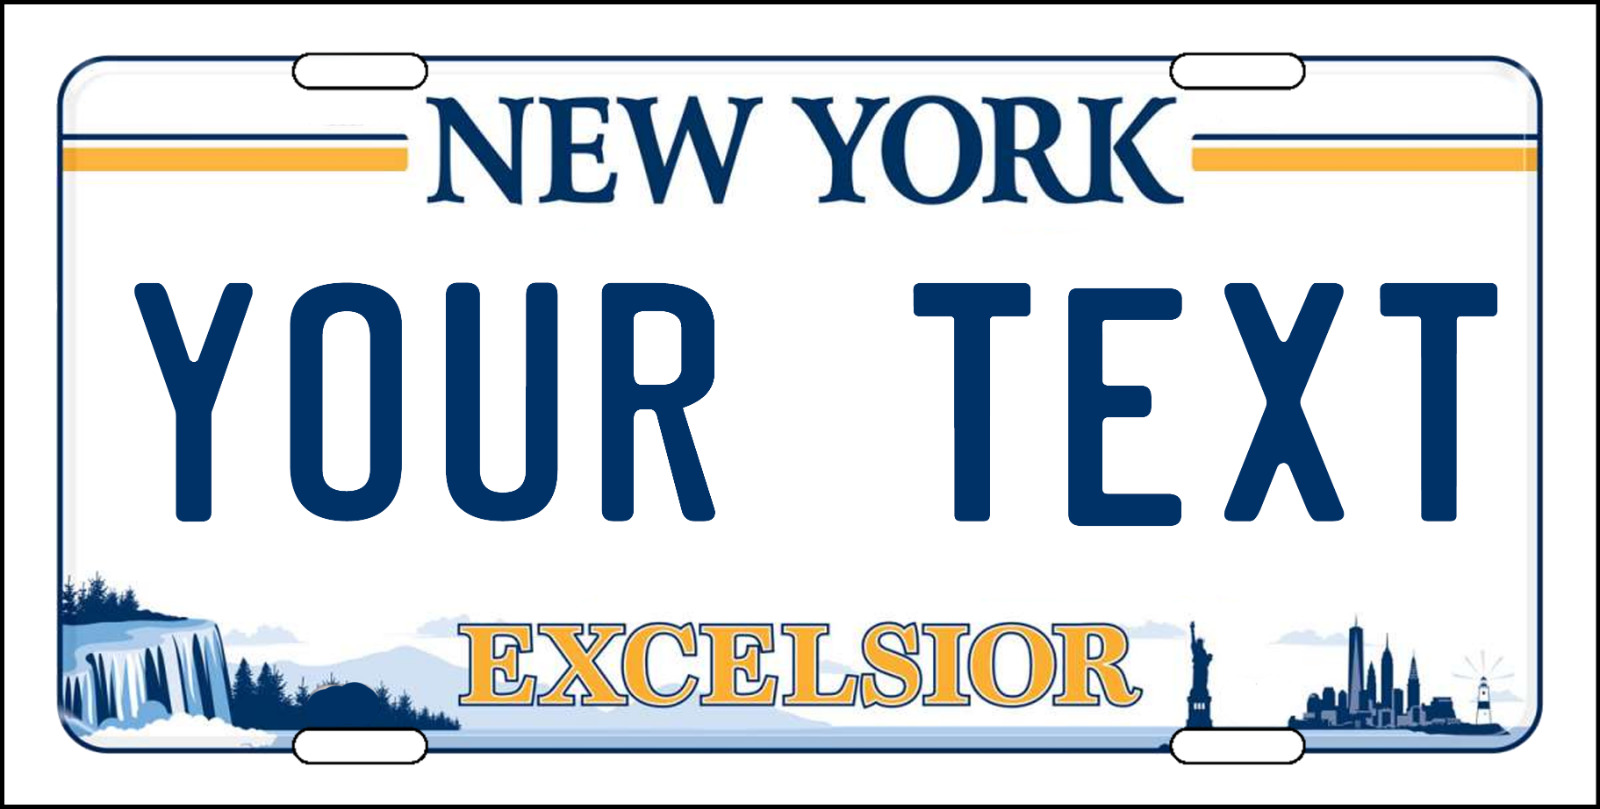 CUSTOMIZE THIS NEW YORK LICENSE PLATE - ANY TEXT YOU WANT, novelty AUTO plates